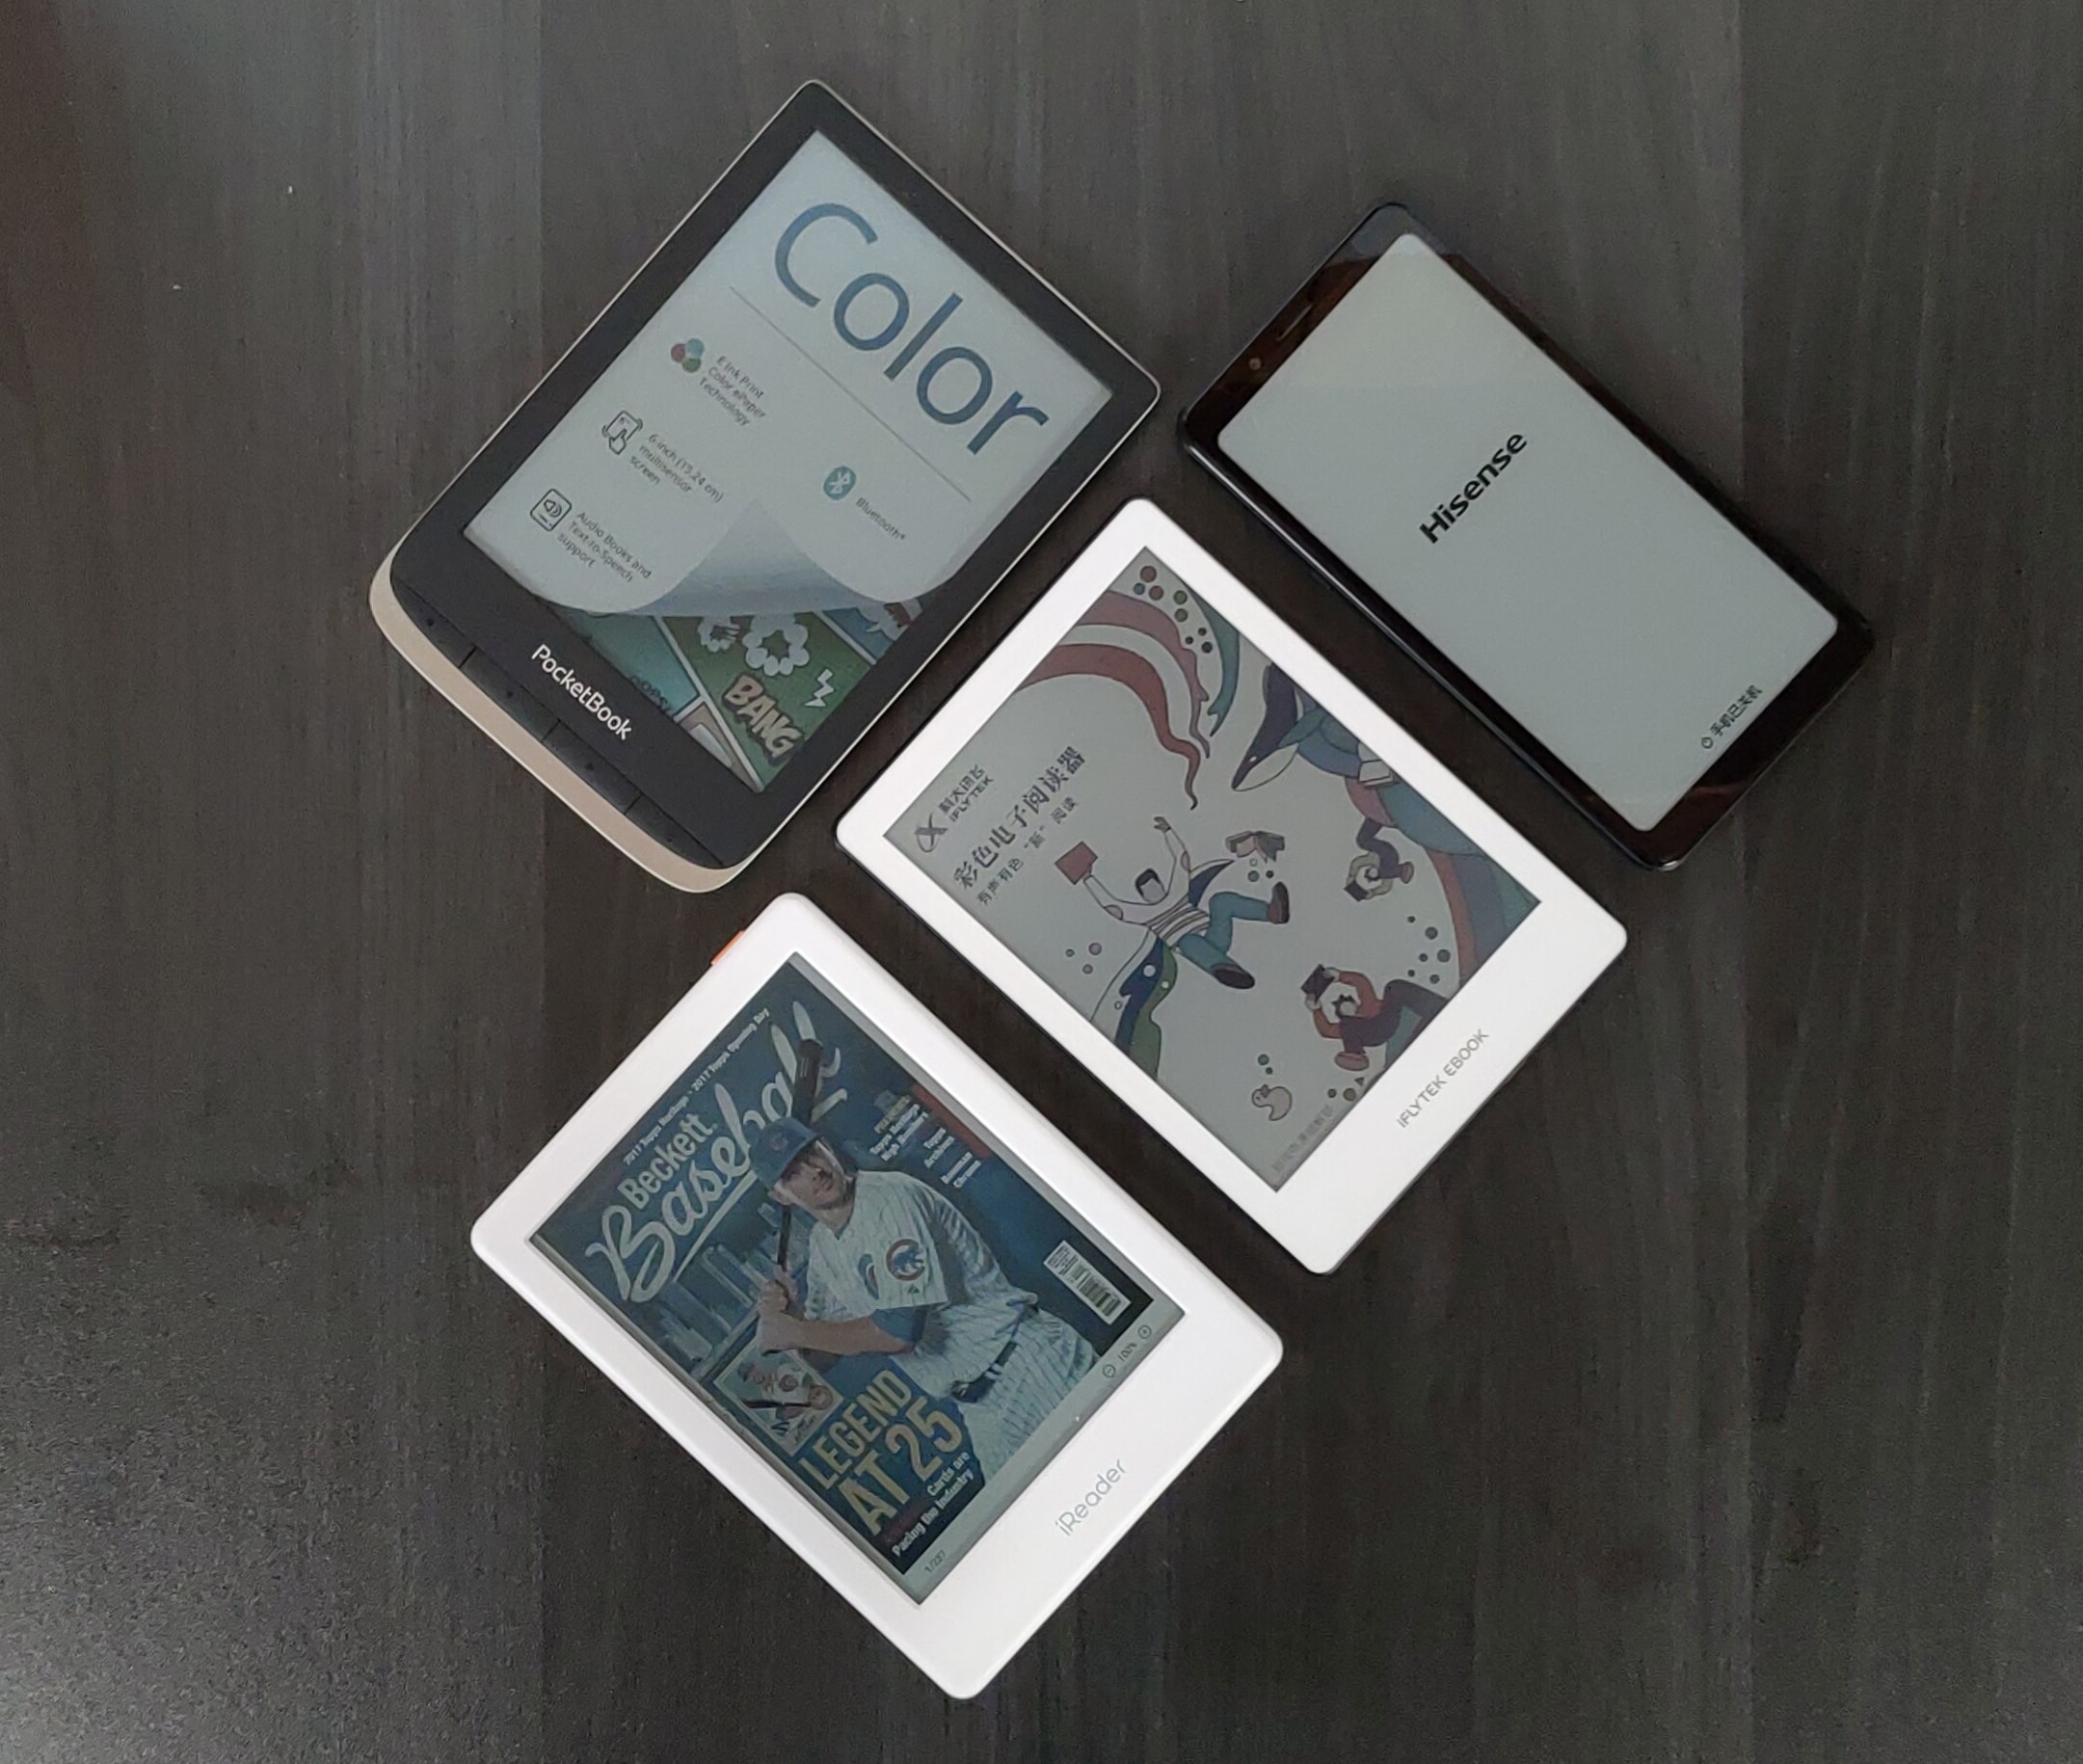 These are all of the Color E INK e-Readers from 2020 - Good e-Reader